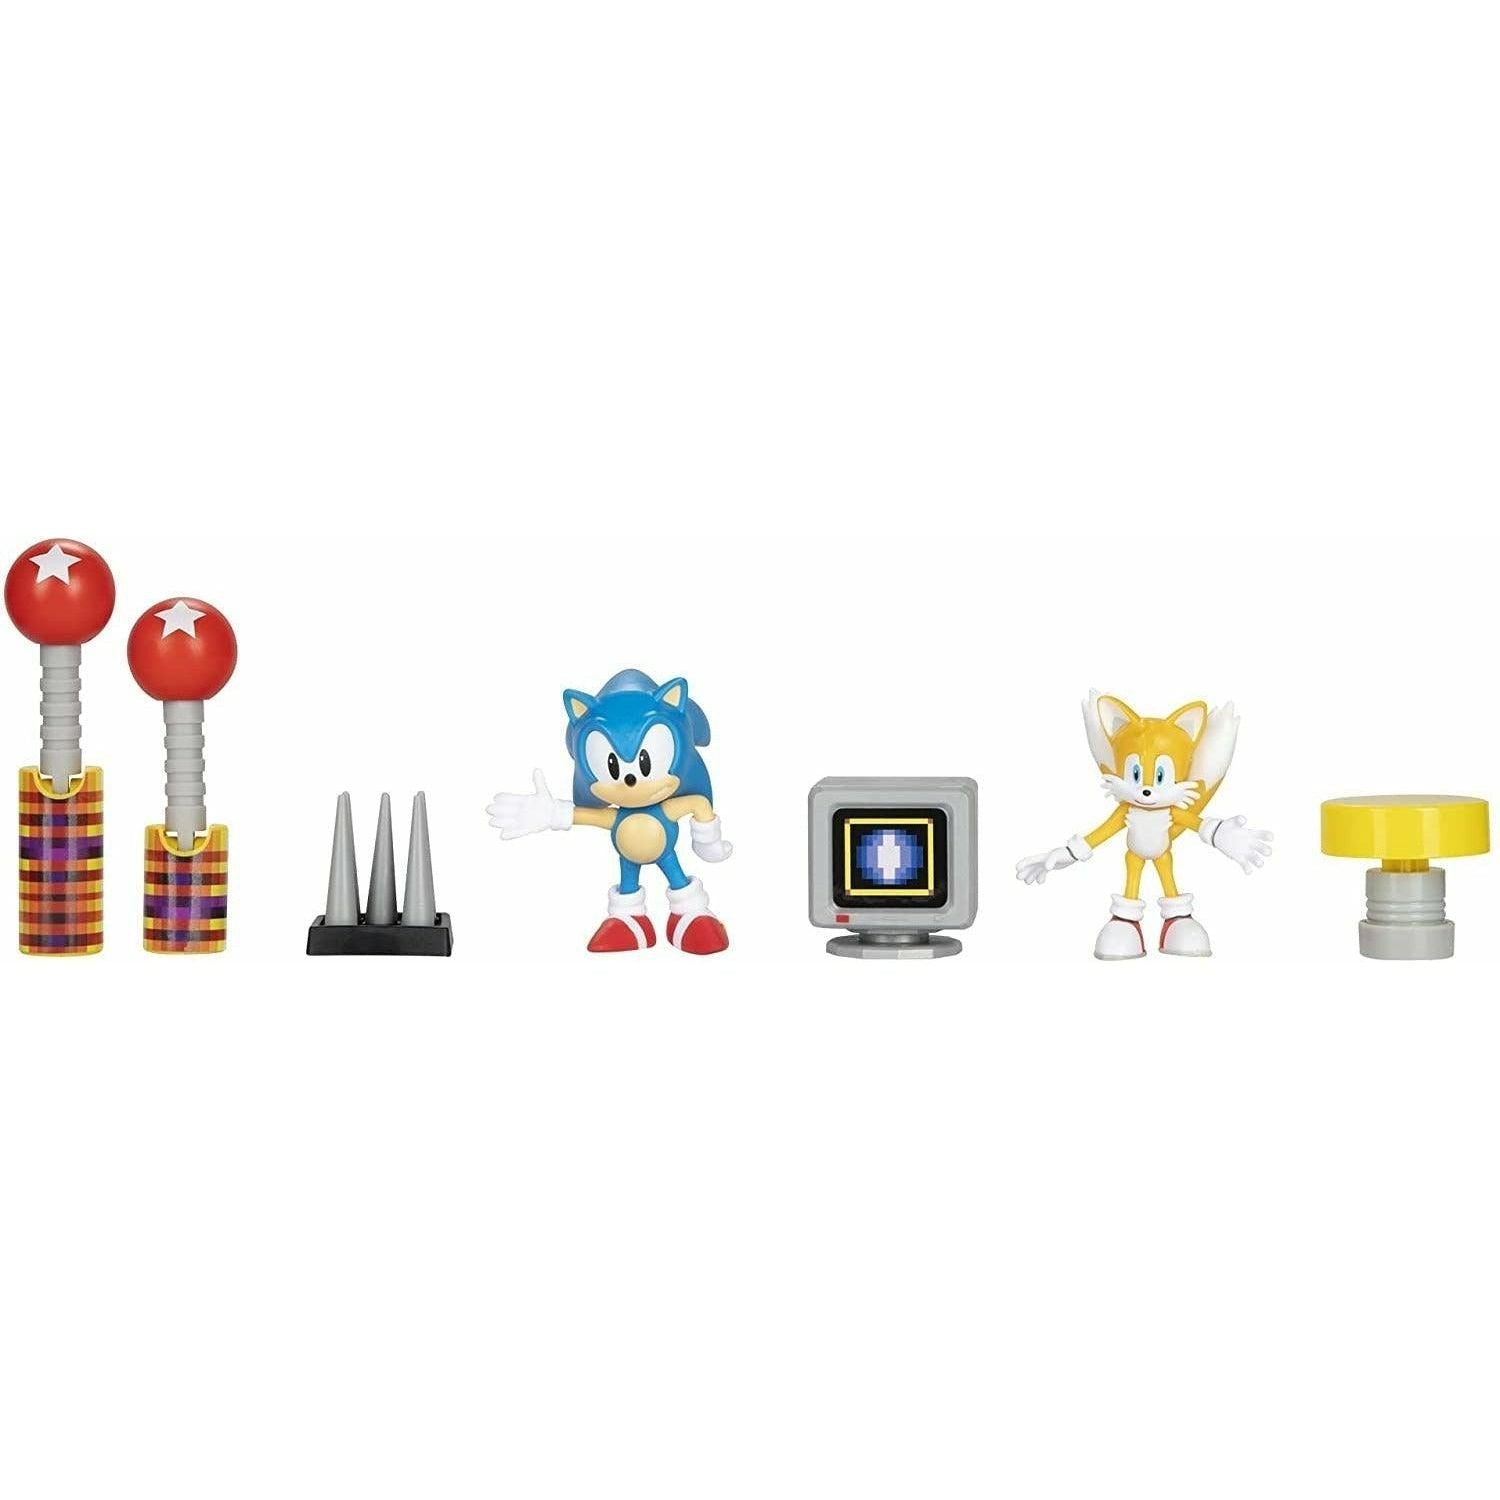 Sonic The Hedgehog 2.5-Inch Action Figure Diorama Set - BumbleToys - 5-7 Years, 8-13 Years, Action Figures, Boys, Characters, Girls, OXE, Pre-Order, Sonic